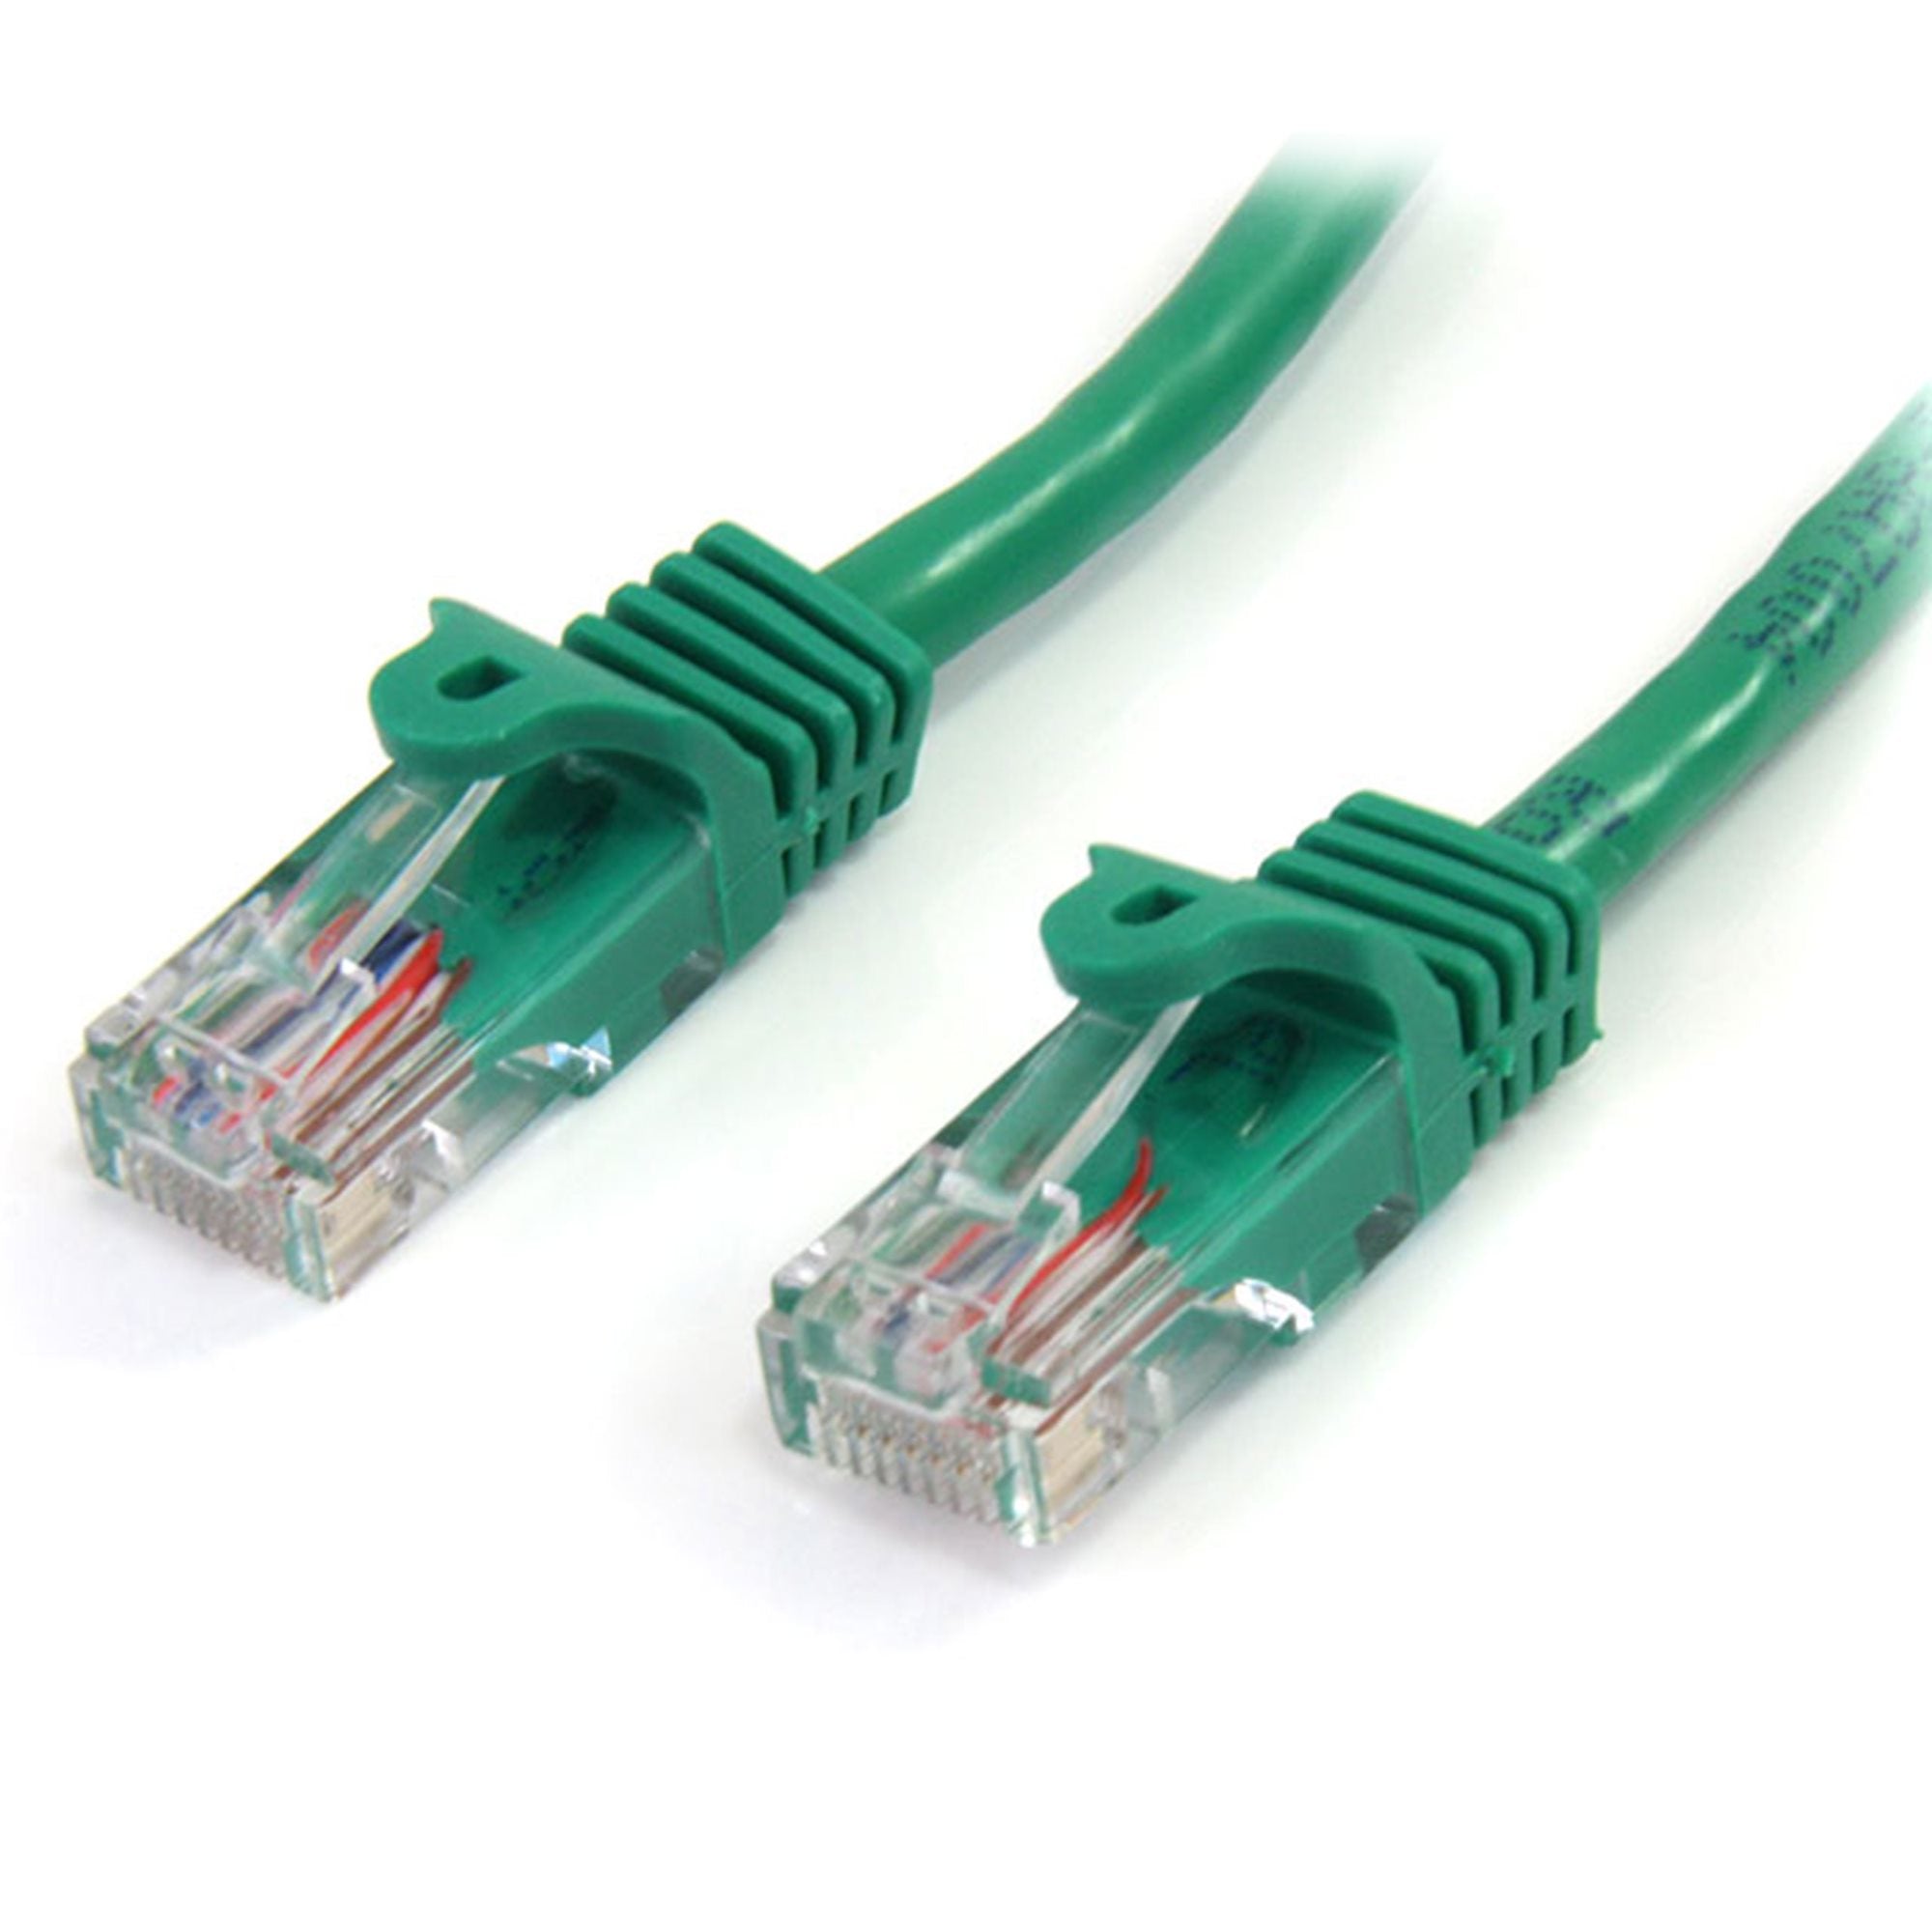 StarTech.com Cat5e Patch Cable with Snagless RJ45 Connectors - 3m, Green